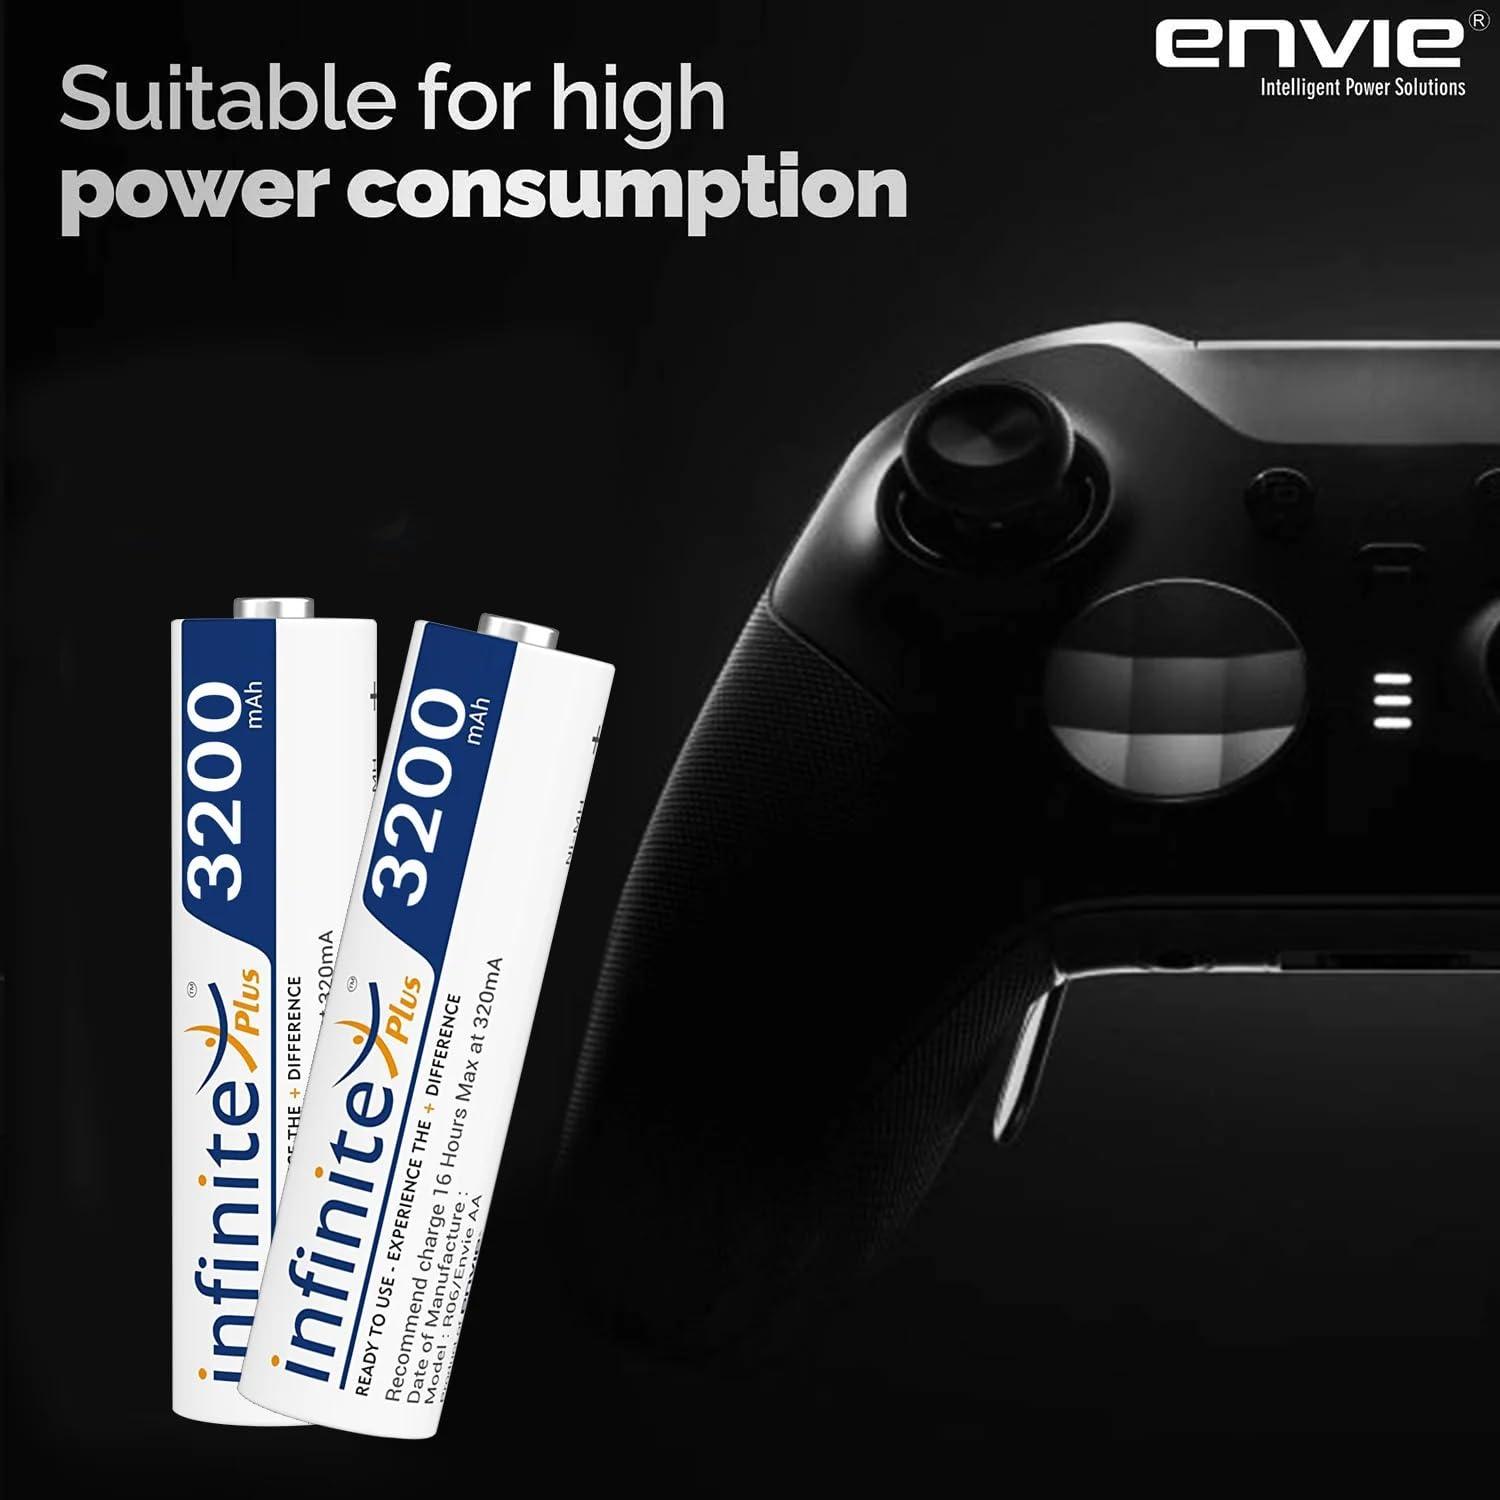 ENVIE (AA 3200 4PL) Infinite Rechargeable Battery for Remote Controls, Electronic Toys, Cameras, Flashlights and Others - Digitek